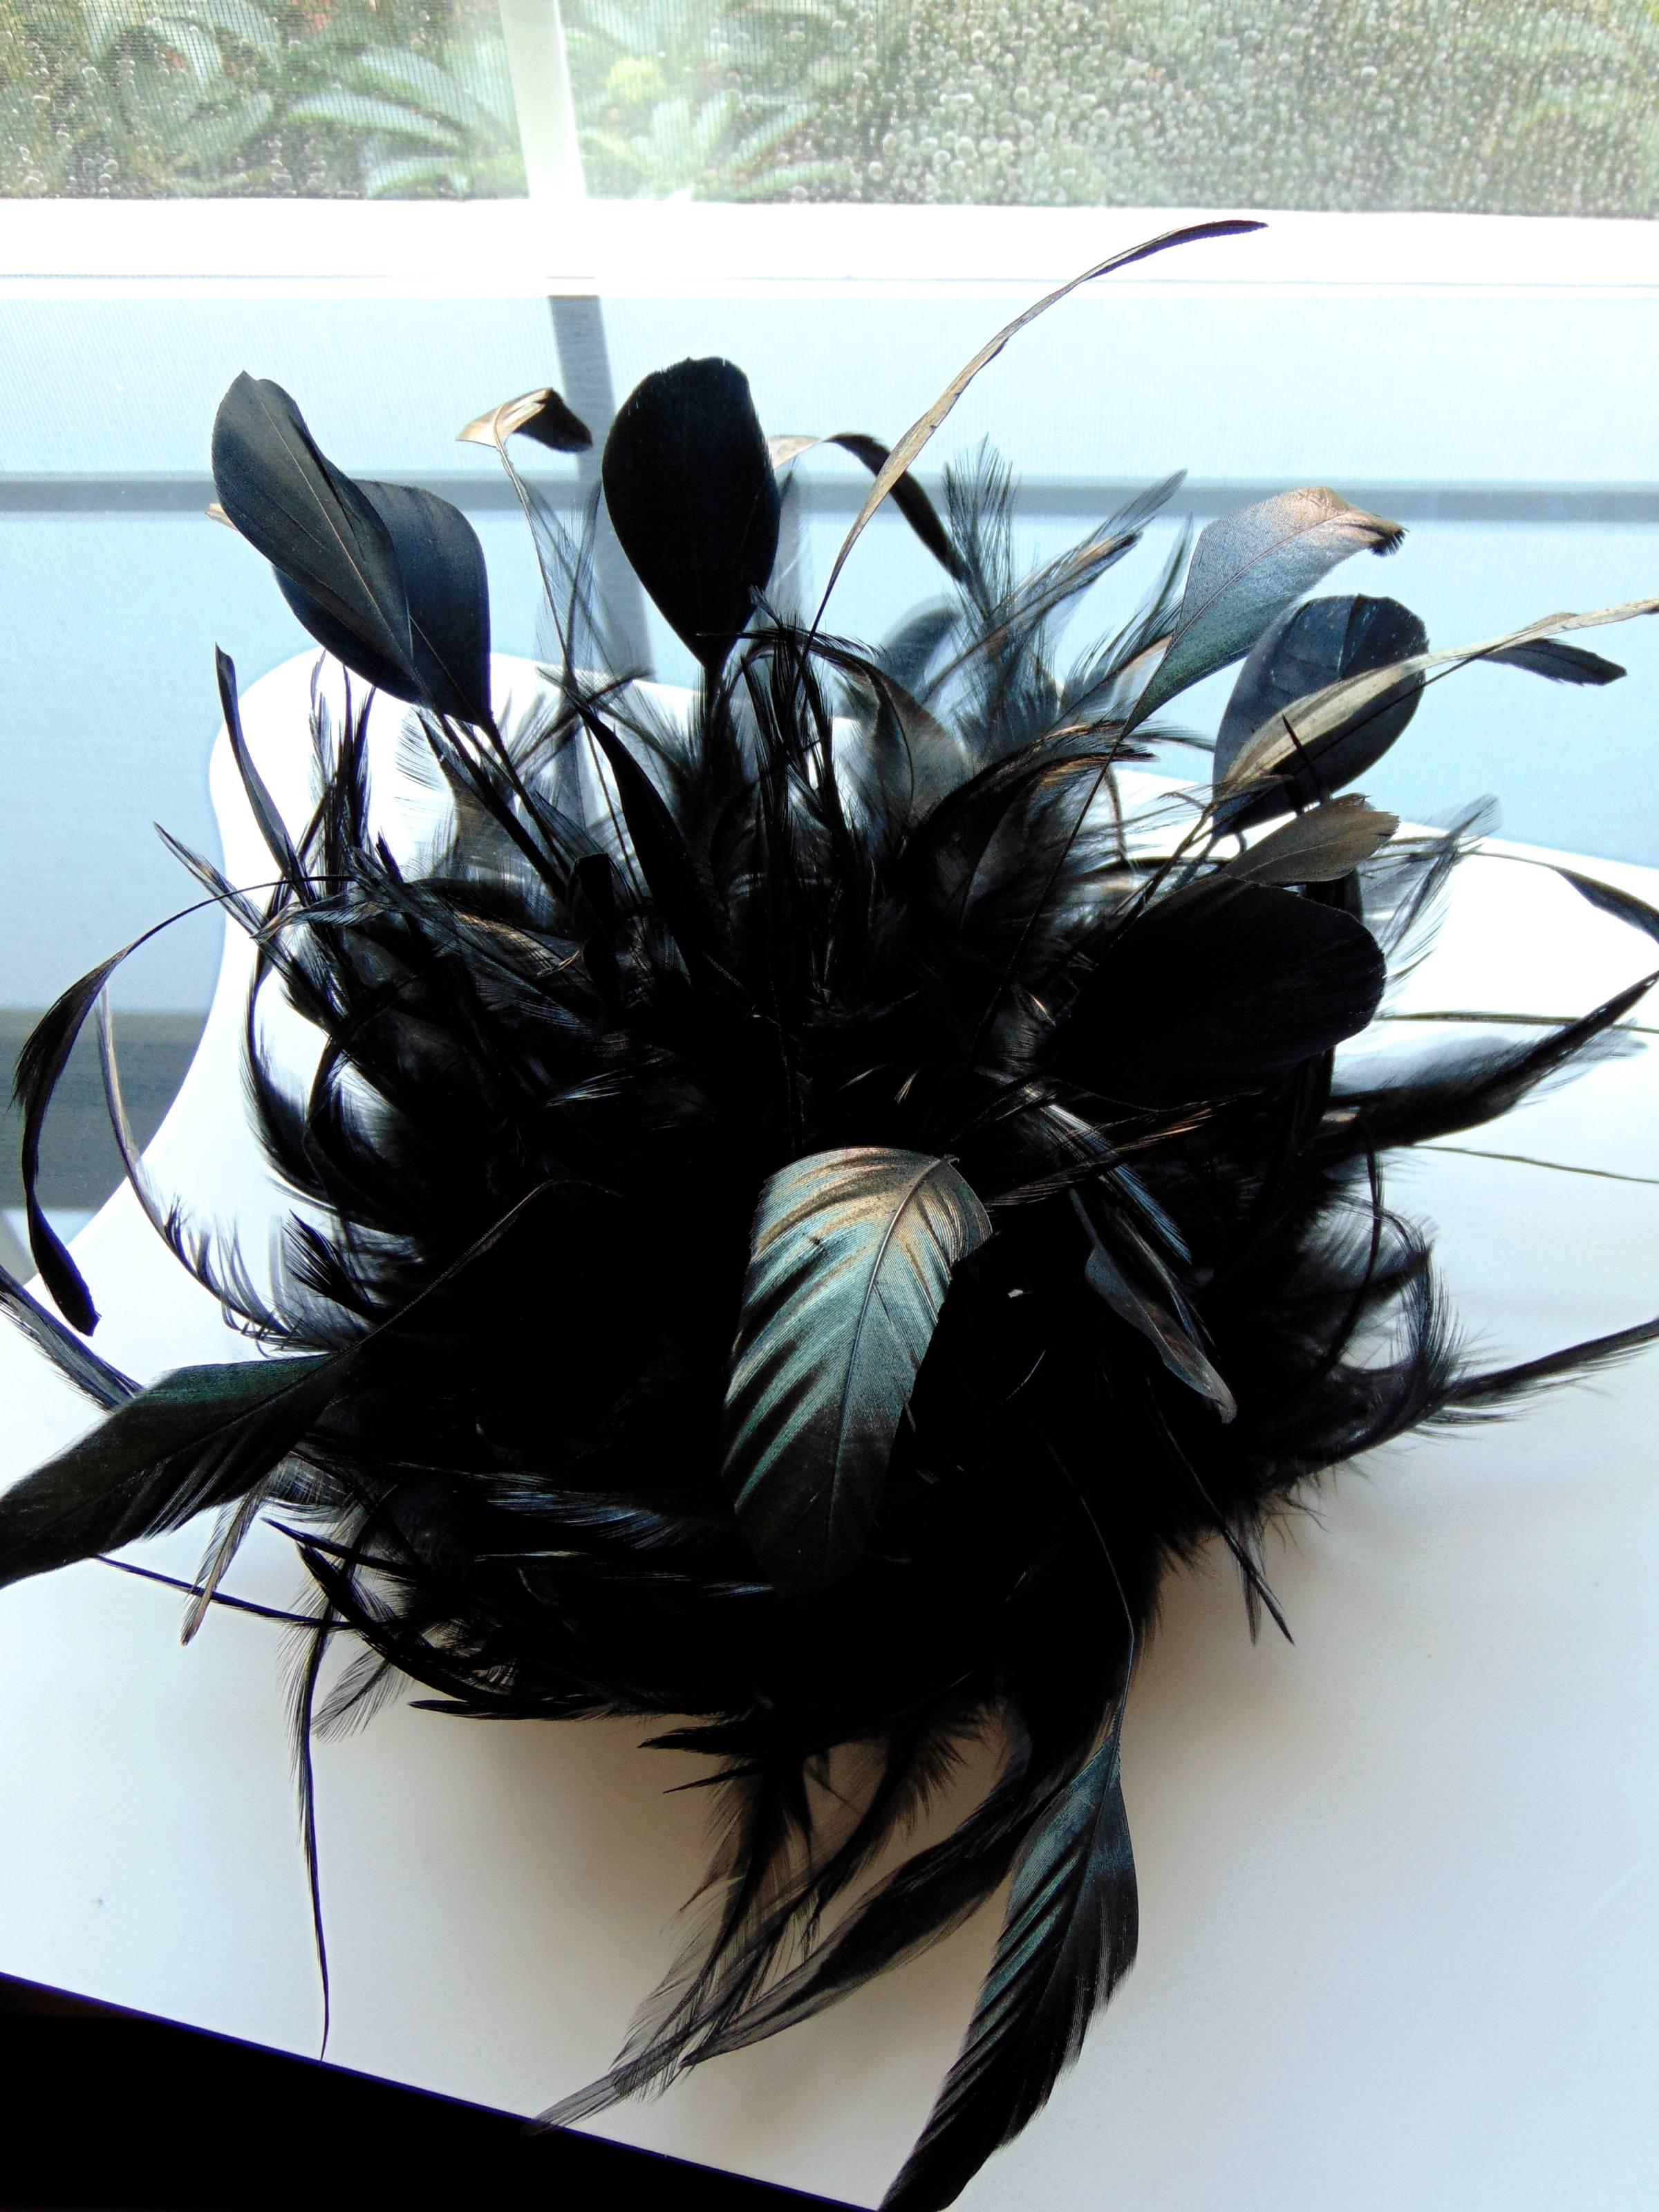 Rare Yves Saint Laurent Black Feather Hat or Cap 1970s One Size Fits Most 3